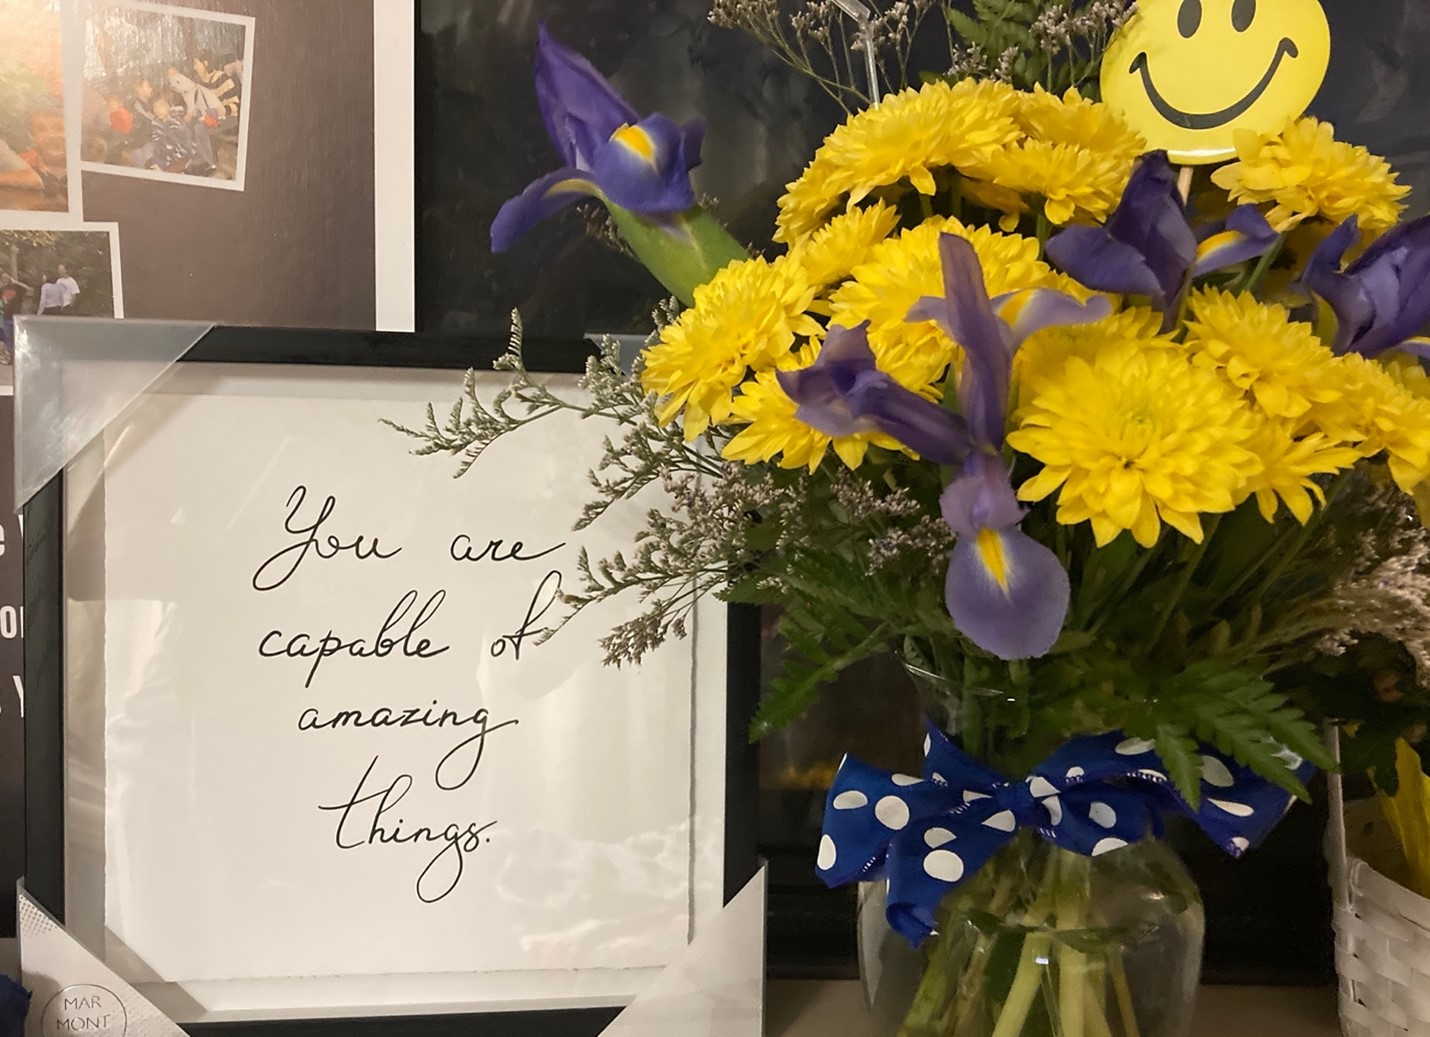 A vase of yellow daisy-like flowers and a note that says "You are capable of amazing things."